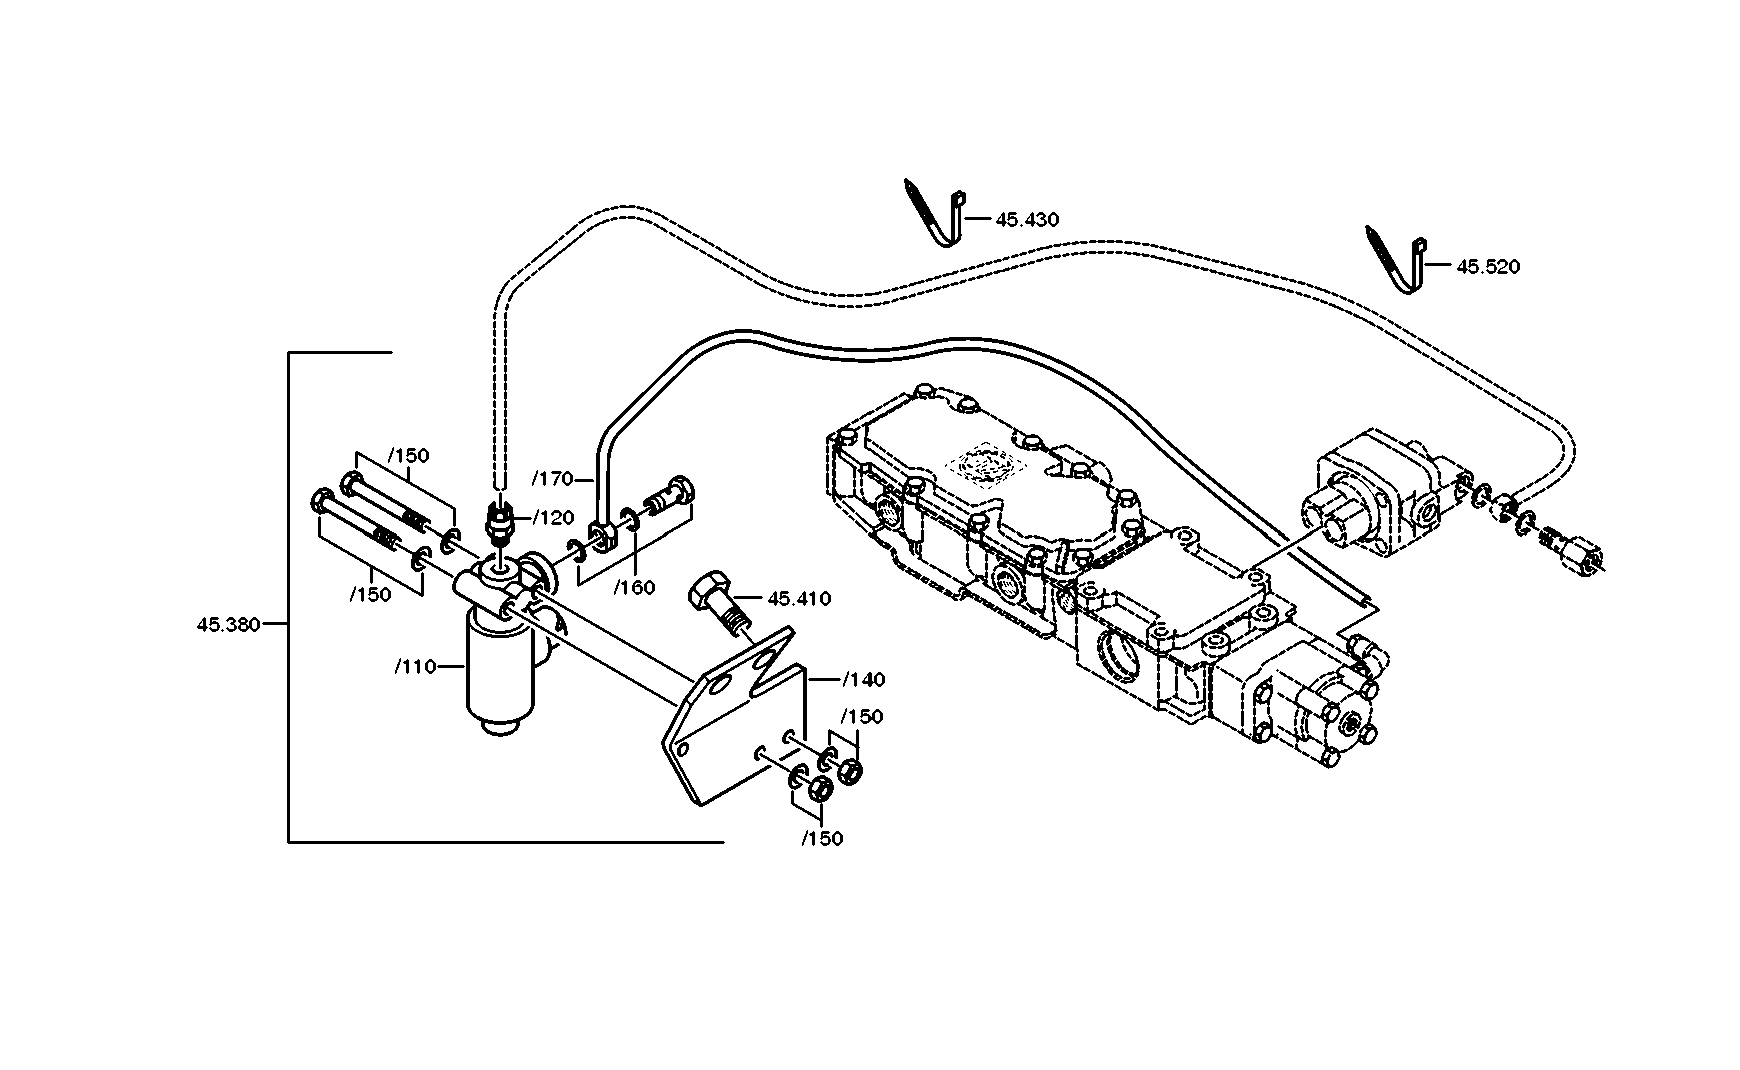 drawing for IVECO BAUM2 - SOLENOID VALVE (figure 3)